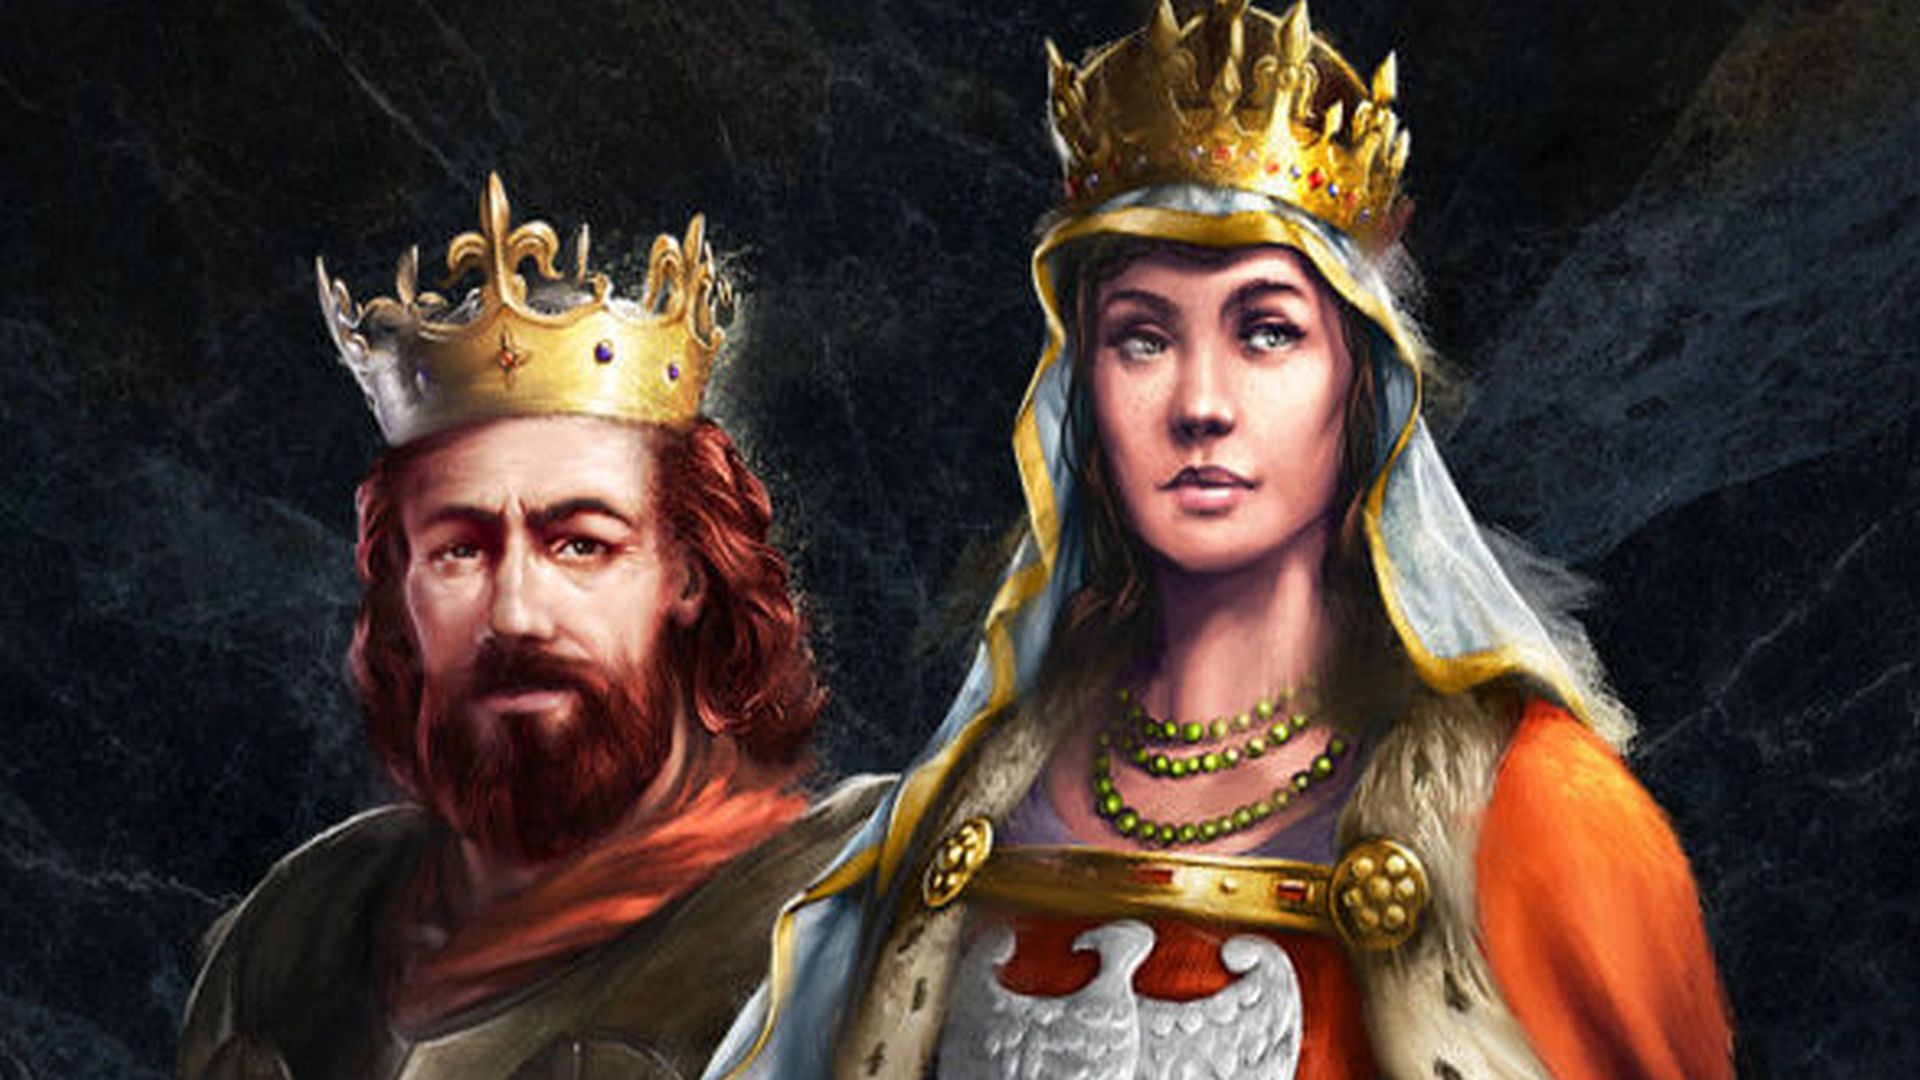 Major Age of Empires 2: DE update brings new co-op event and campaigns